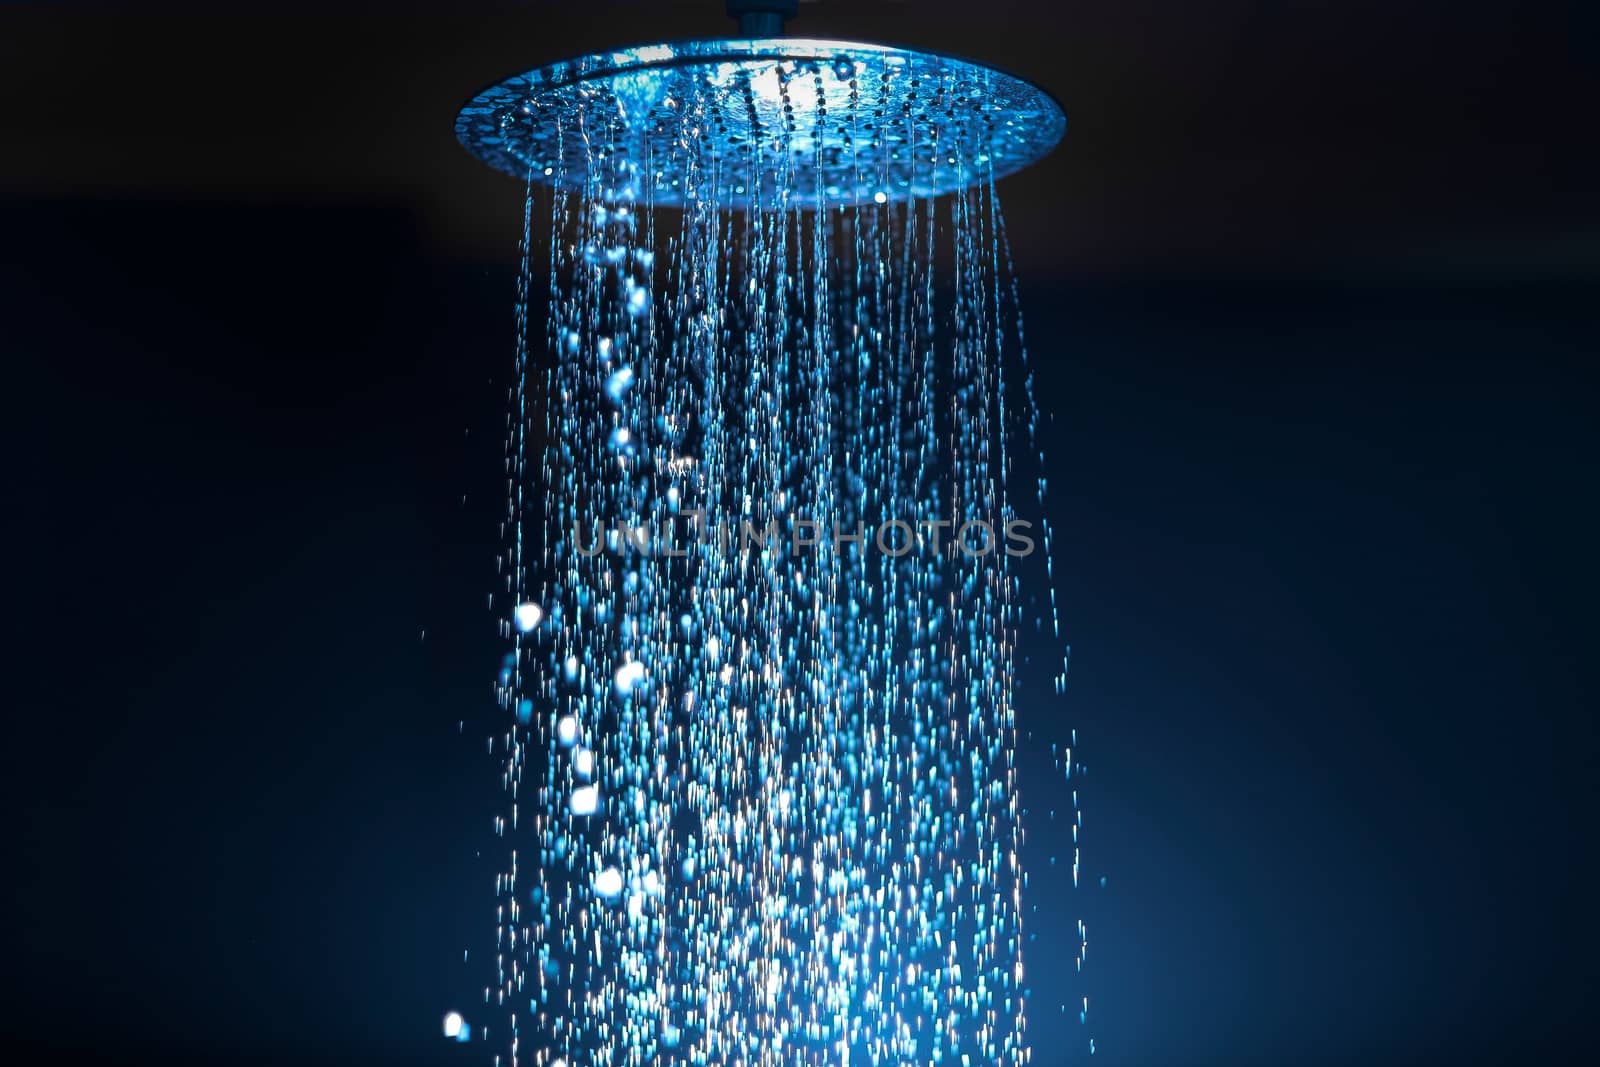 Water falling from the shower on a dark background with blue bac by Opikanets